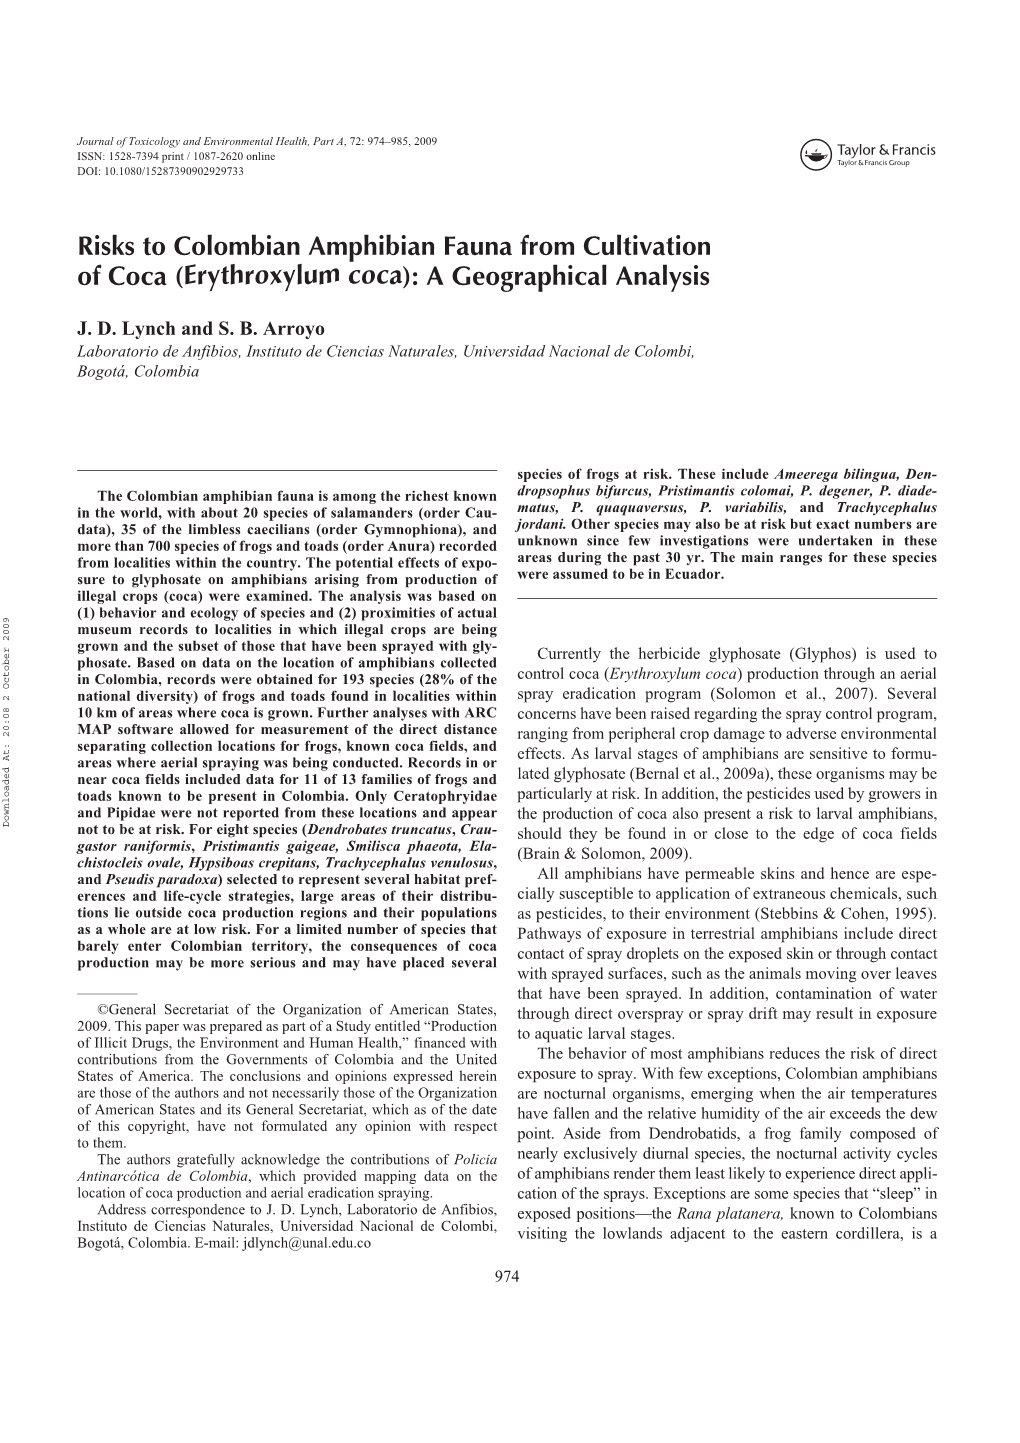 Risks to Colombian Amphibian Fauna from Cultivation of Coca